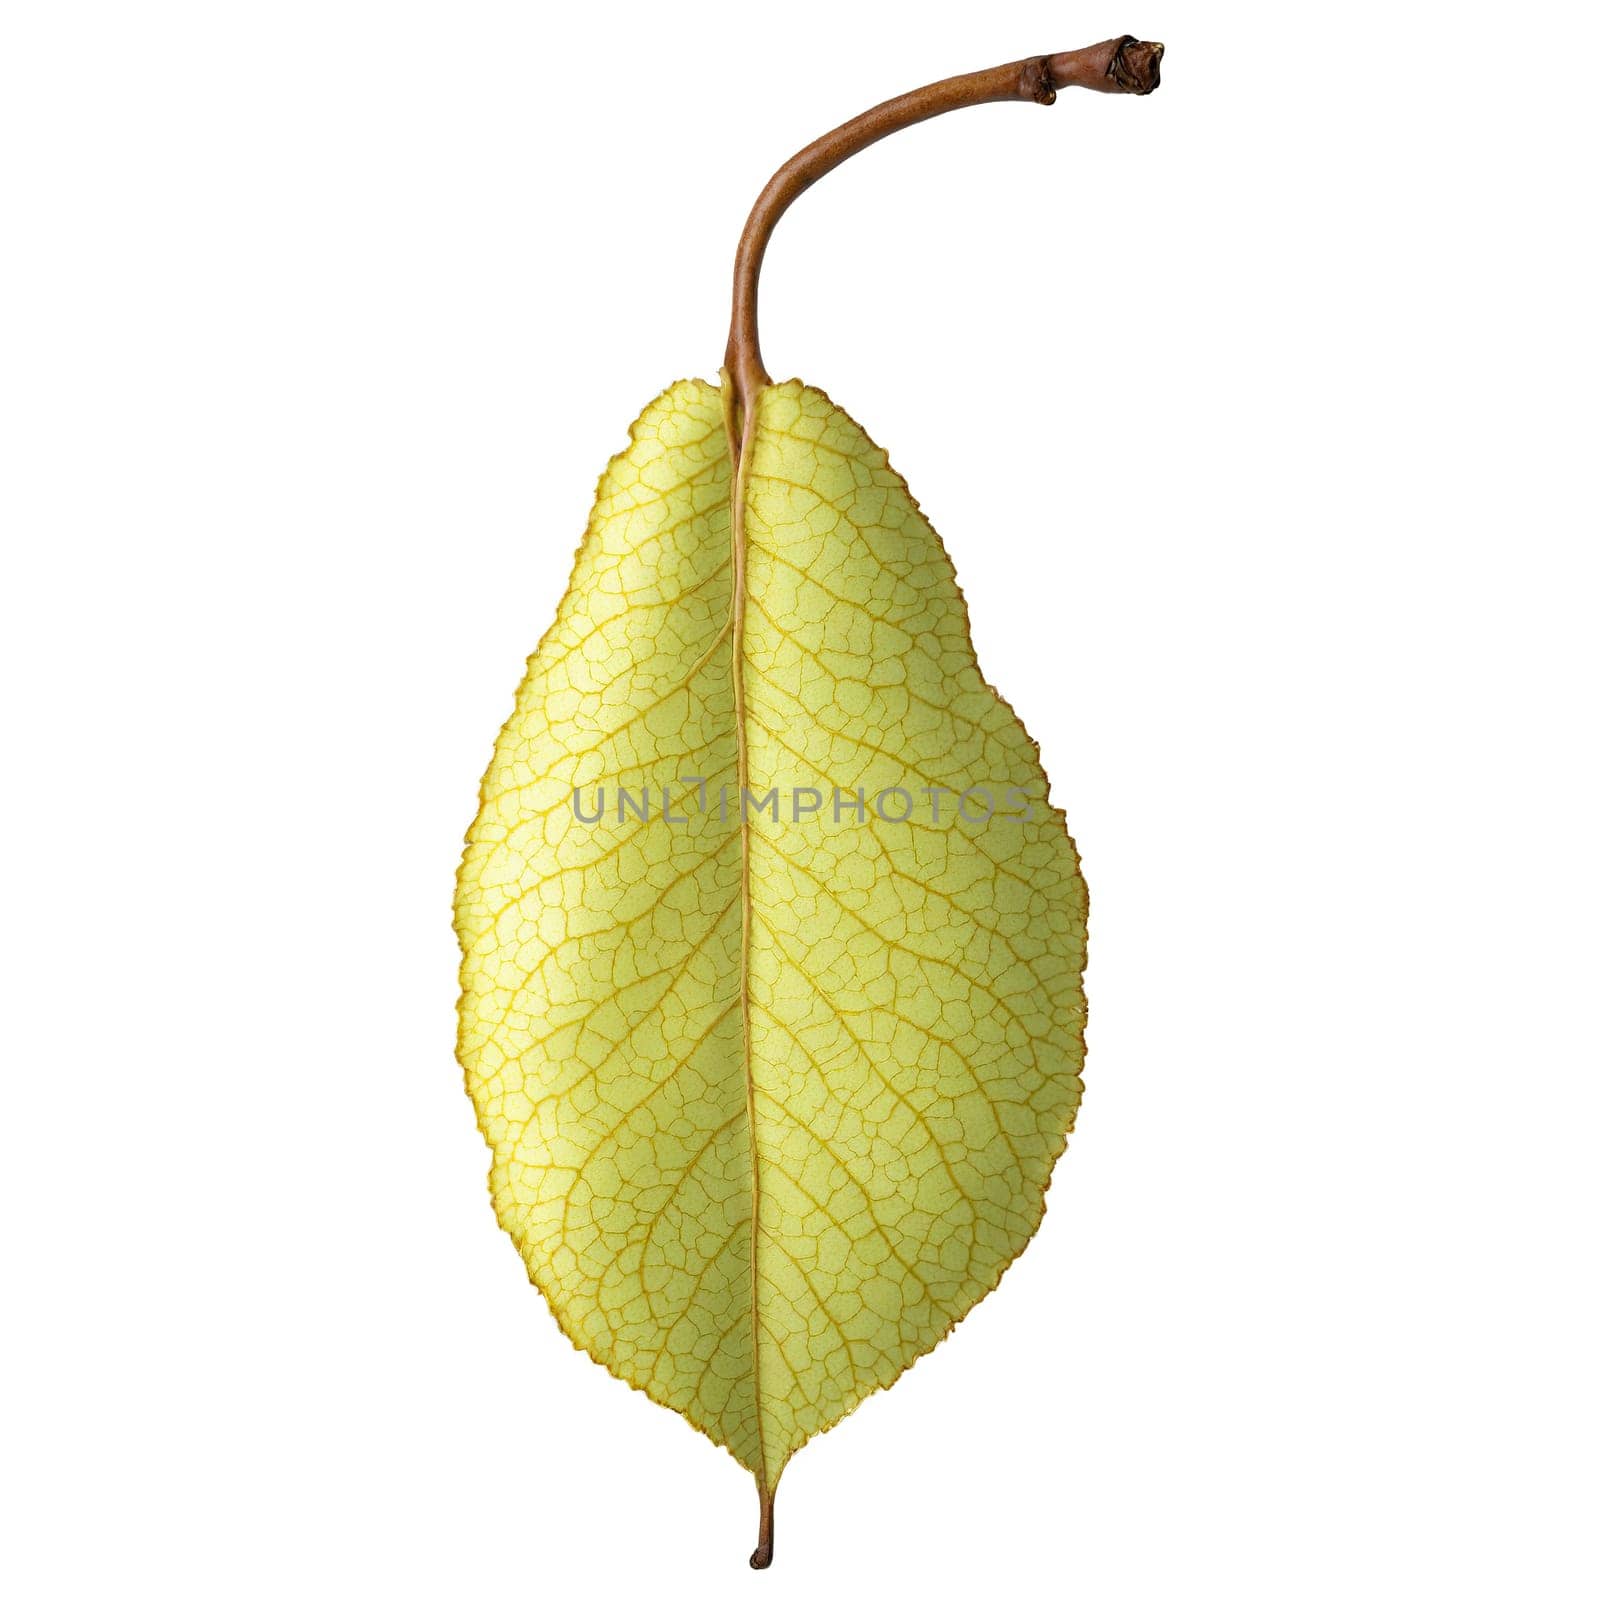 Pear Leaf oval yellow leaf with serrated edges and a smooth texture falling gently Pyrus by panophotograph